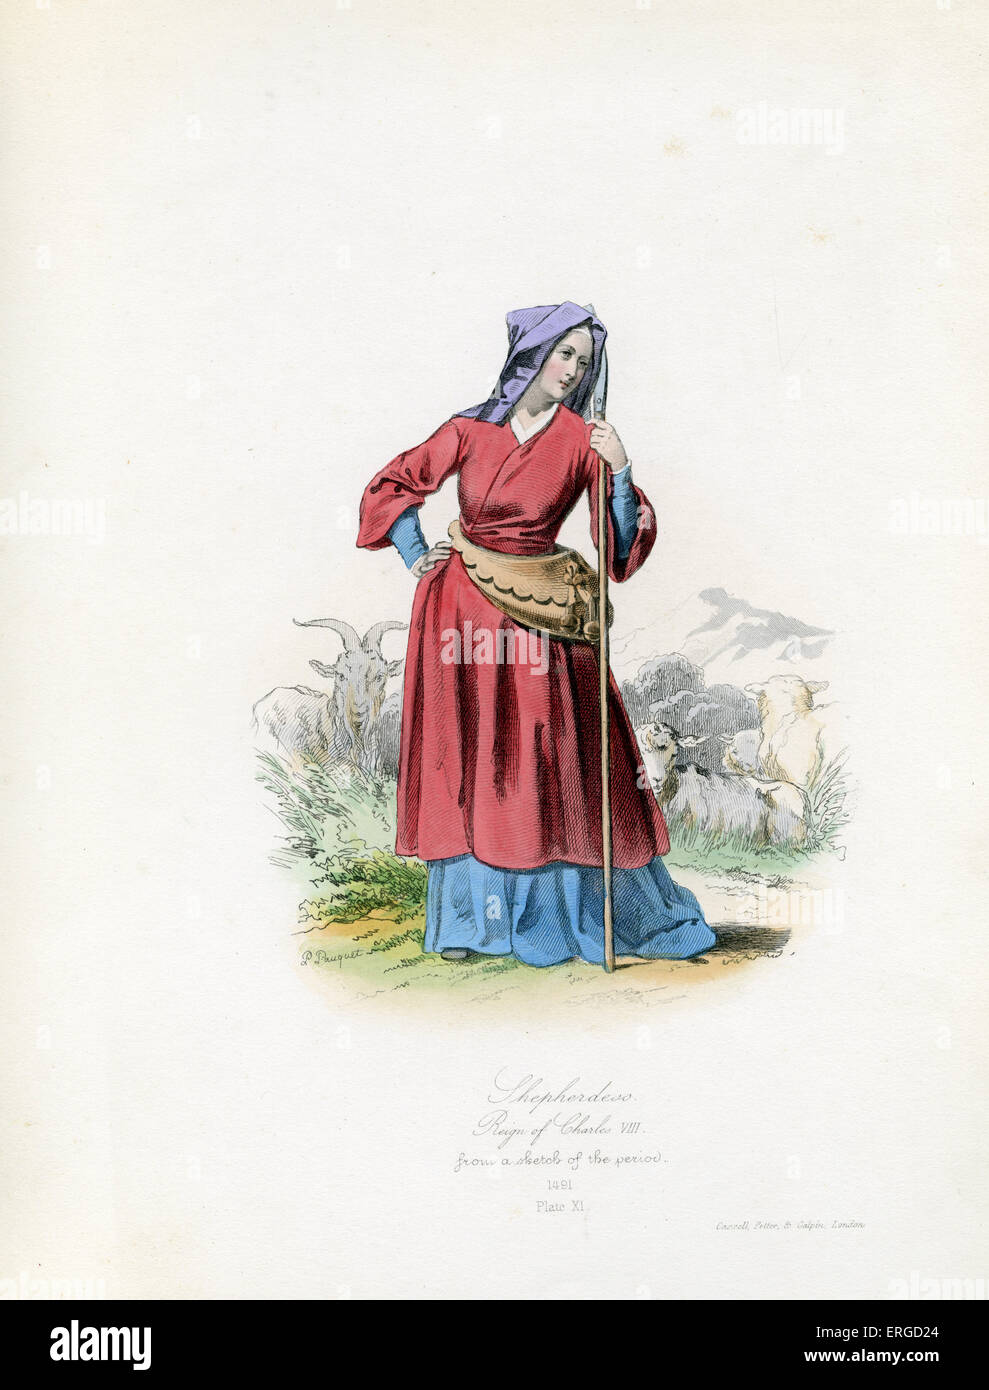 Shepherdess, 1491, during reign of Charles VIII of France.  From engraving by Polidor Pauquet after a sketch of the period. Stock Photo